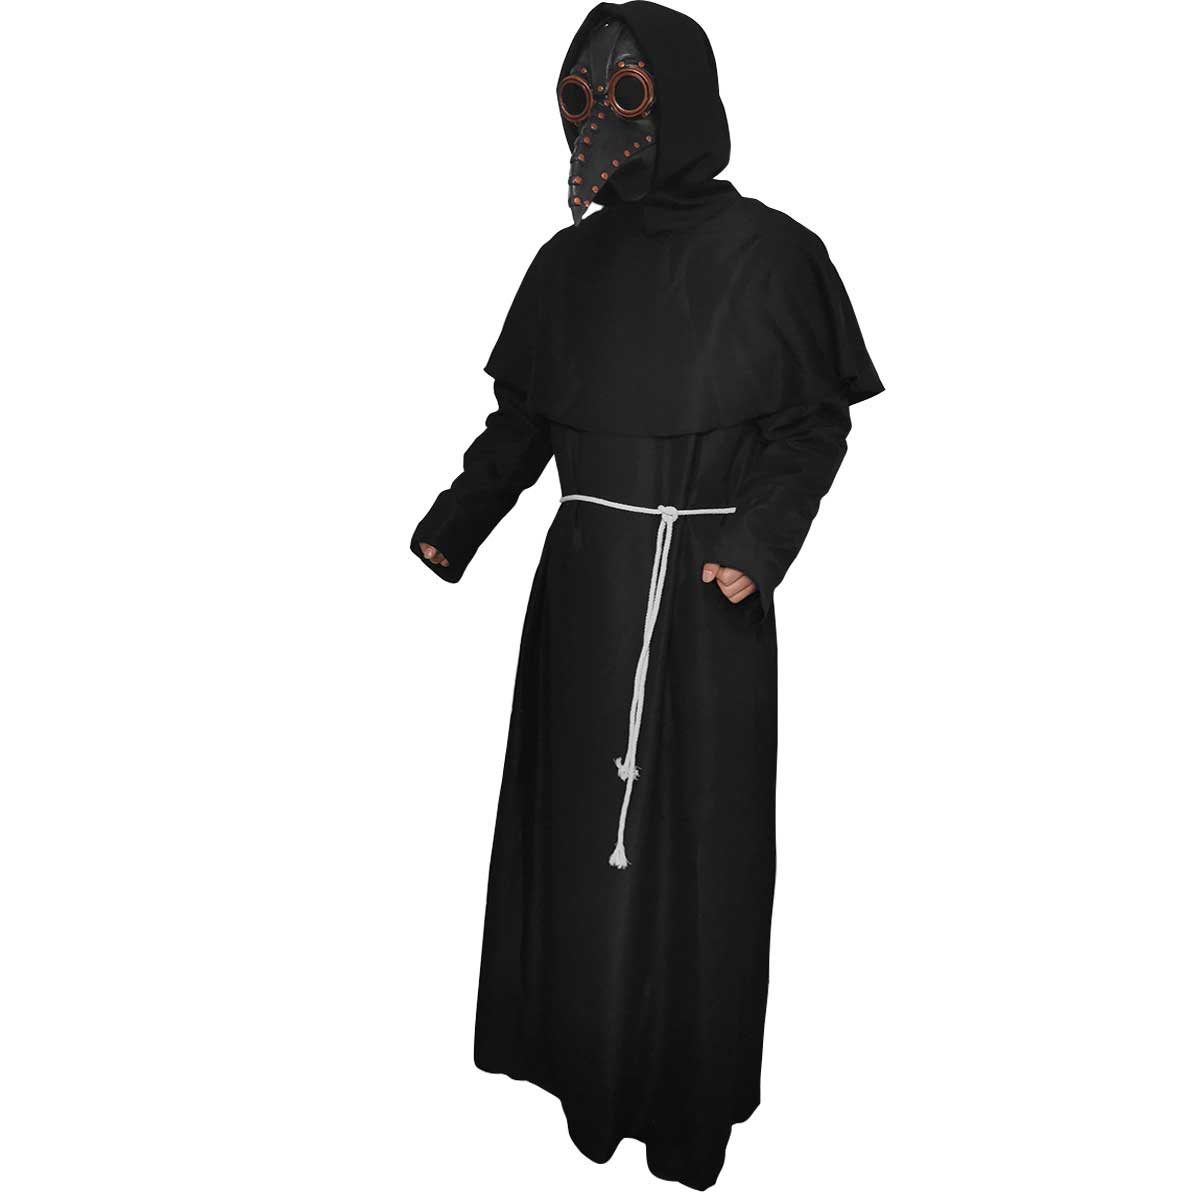 Steampunk Black Death Plague Doctor Halloween Cospaly Costume Gothic Tunic Hooded Uniform-Takerlama